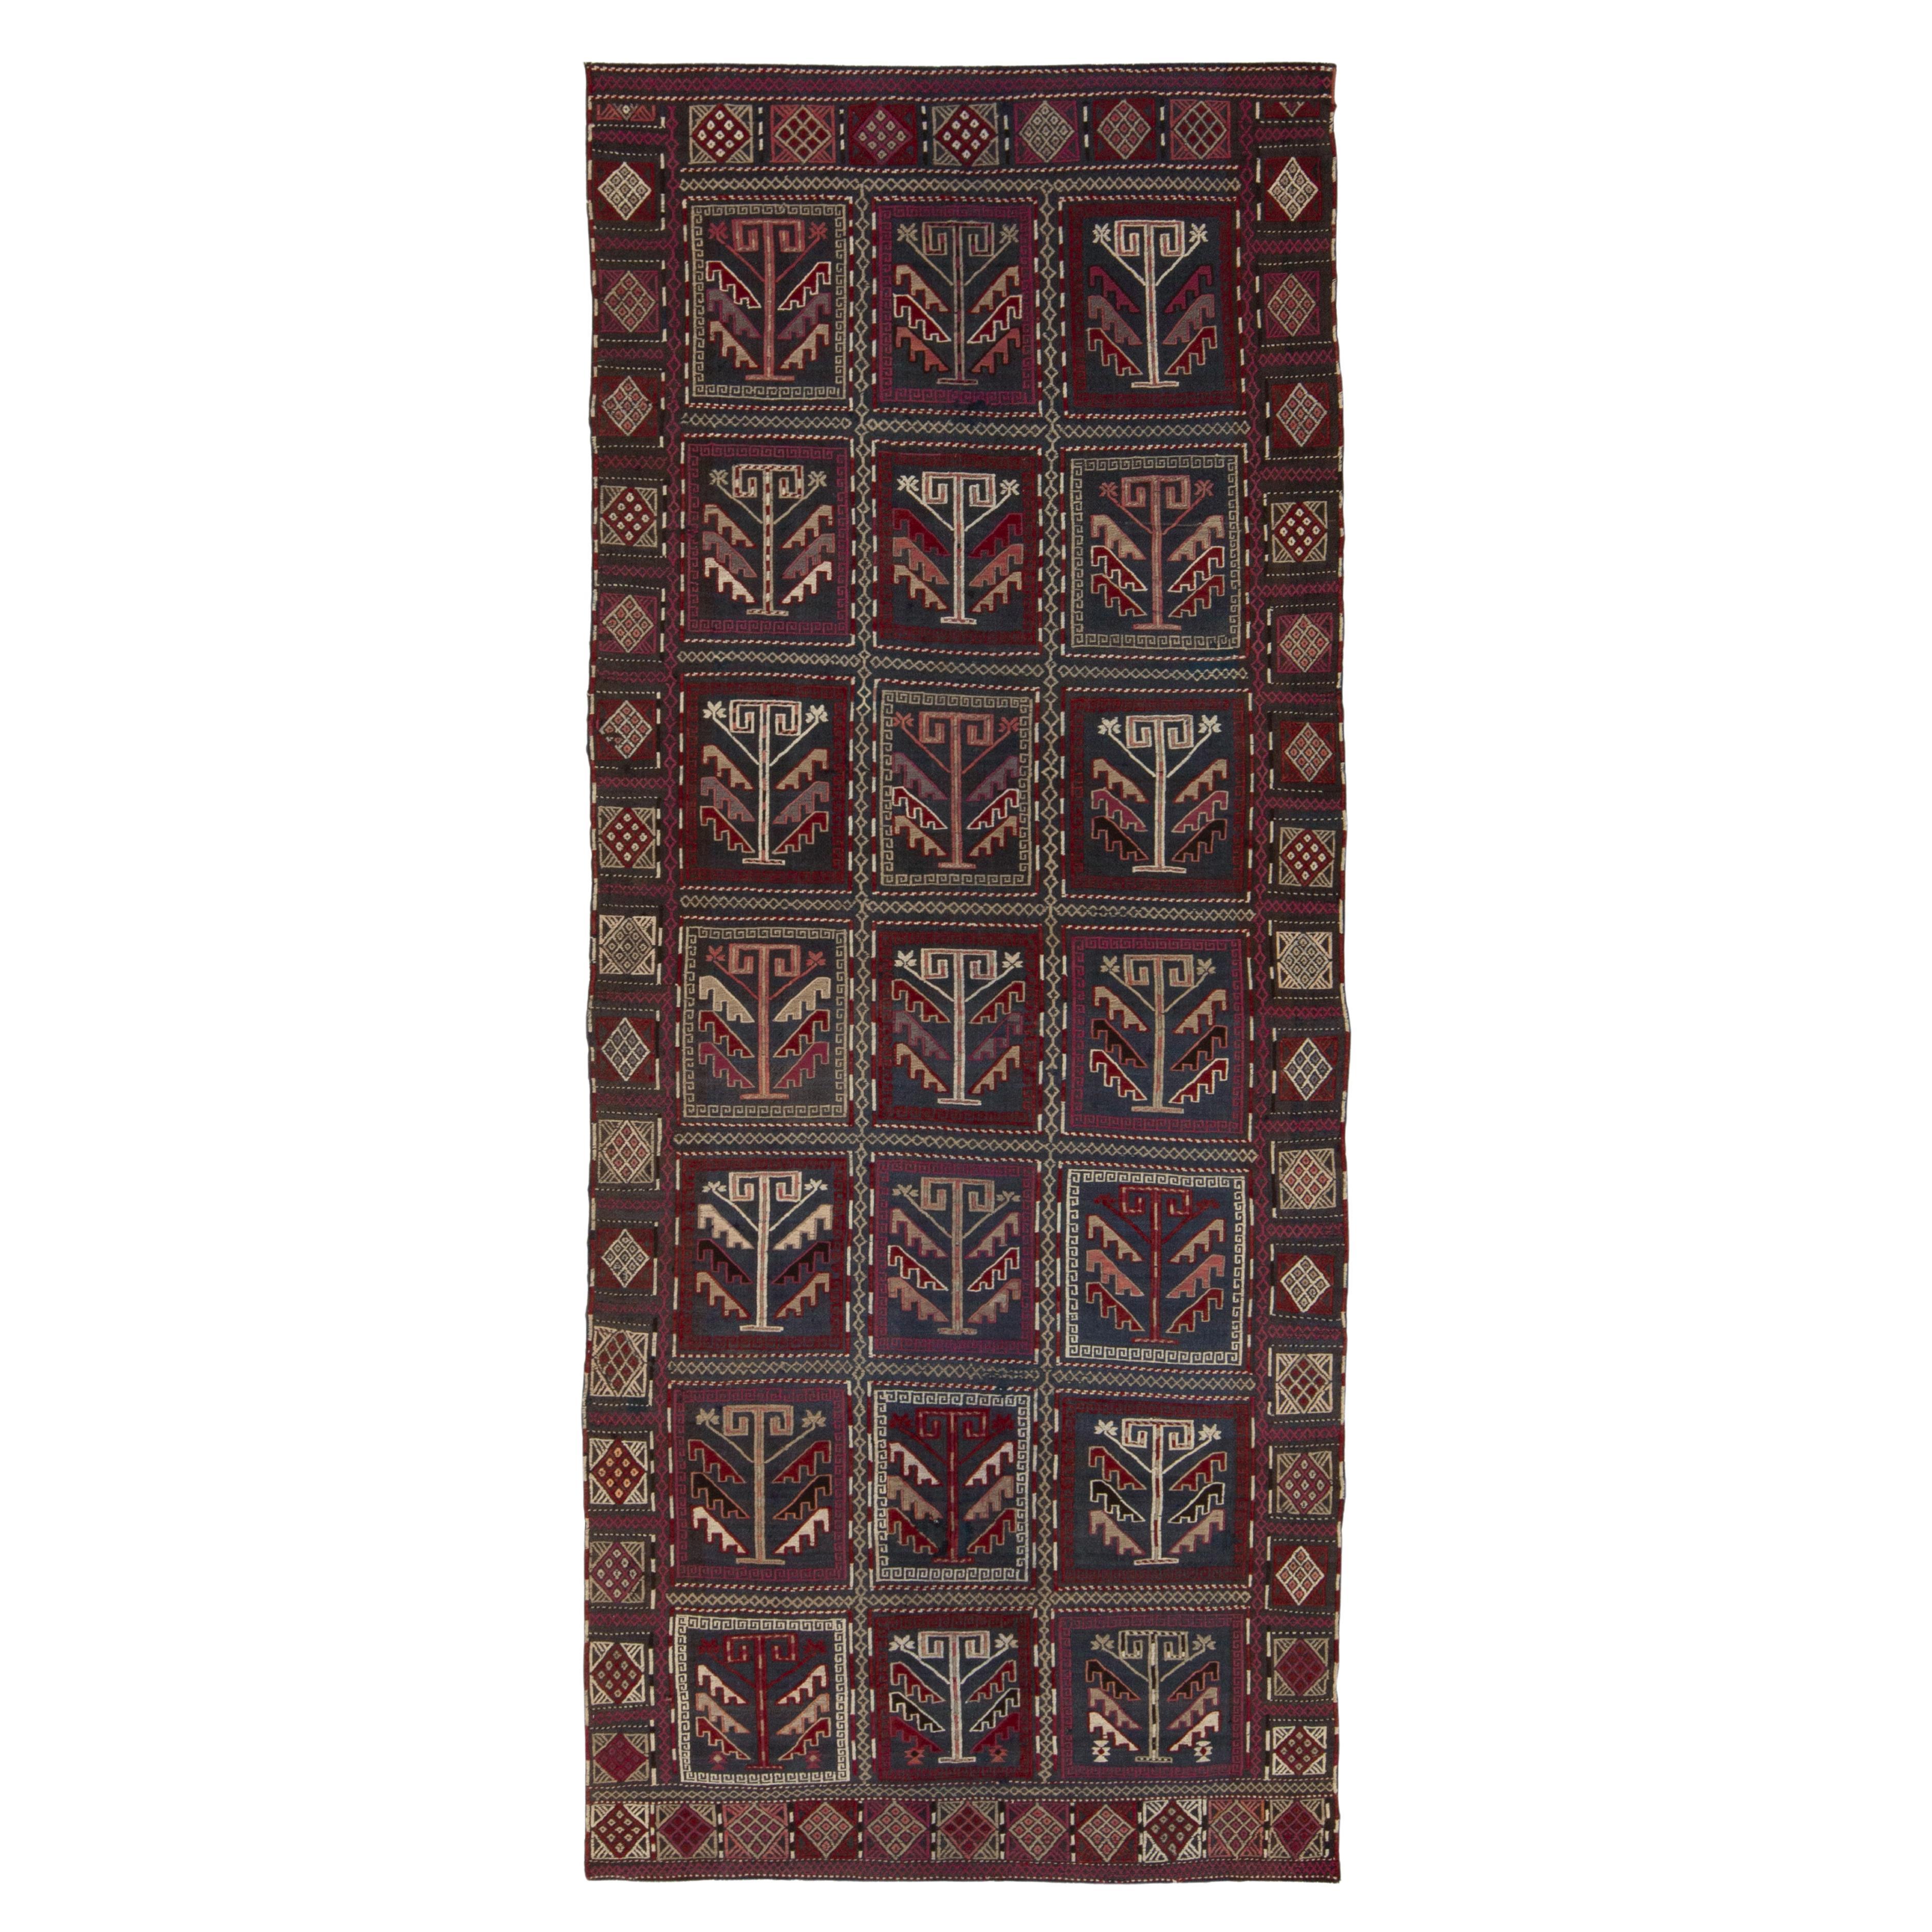 Antique RussianKilim Rug in Blue Embroidered Geometric Pattern by Rug & Kilim For Sale